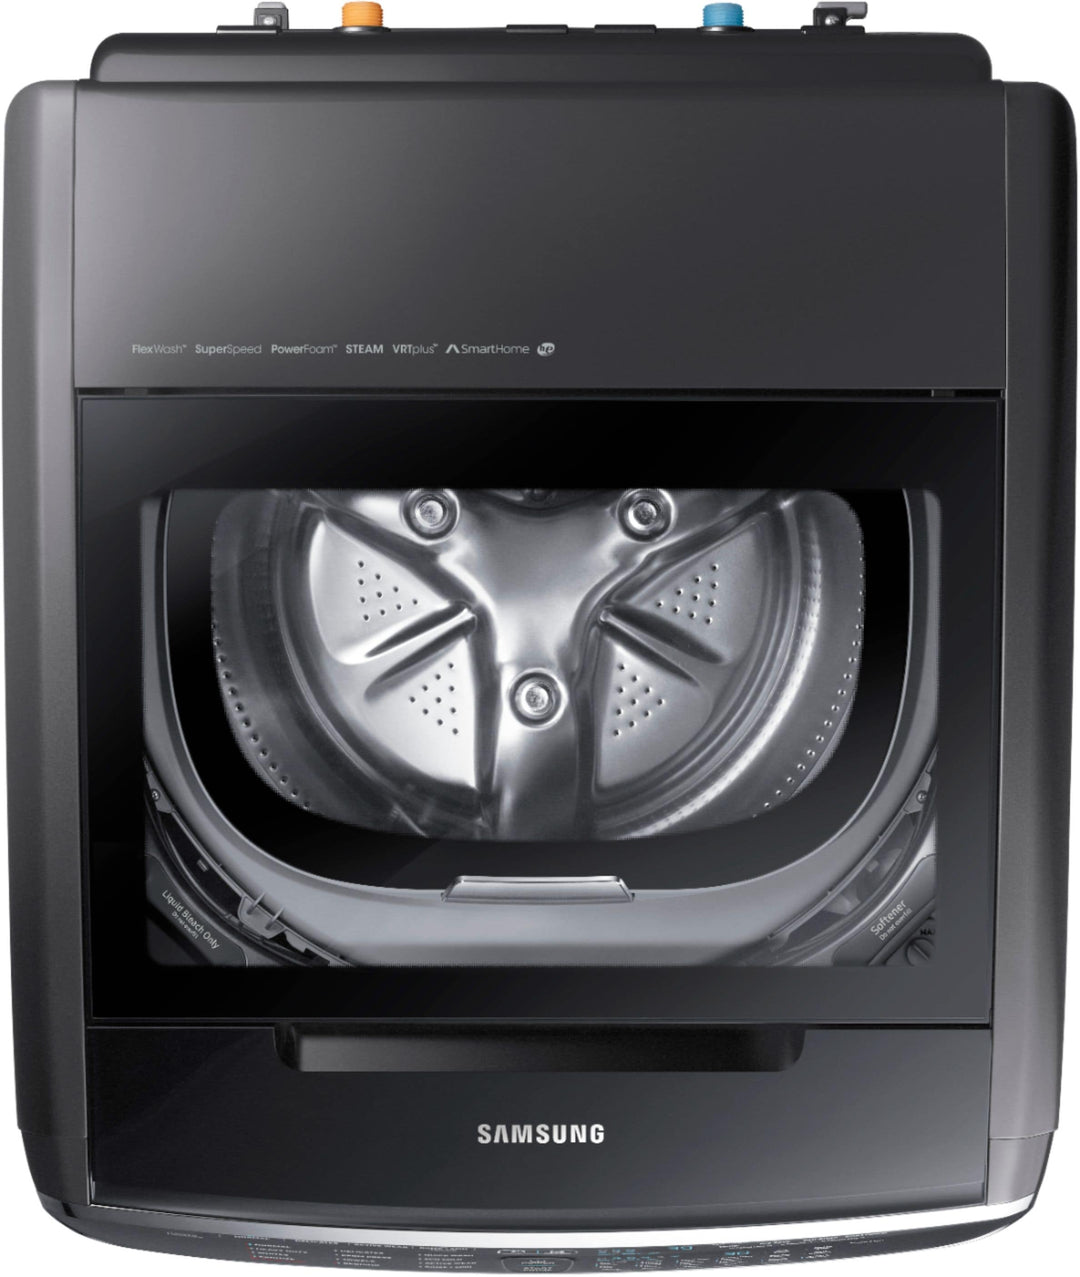 Samsung - 6.0 Cu. Ft. High Efficiency Smart Front Load Washer with Steam and FlexWash - Black stainless steel_16